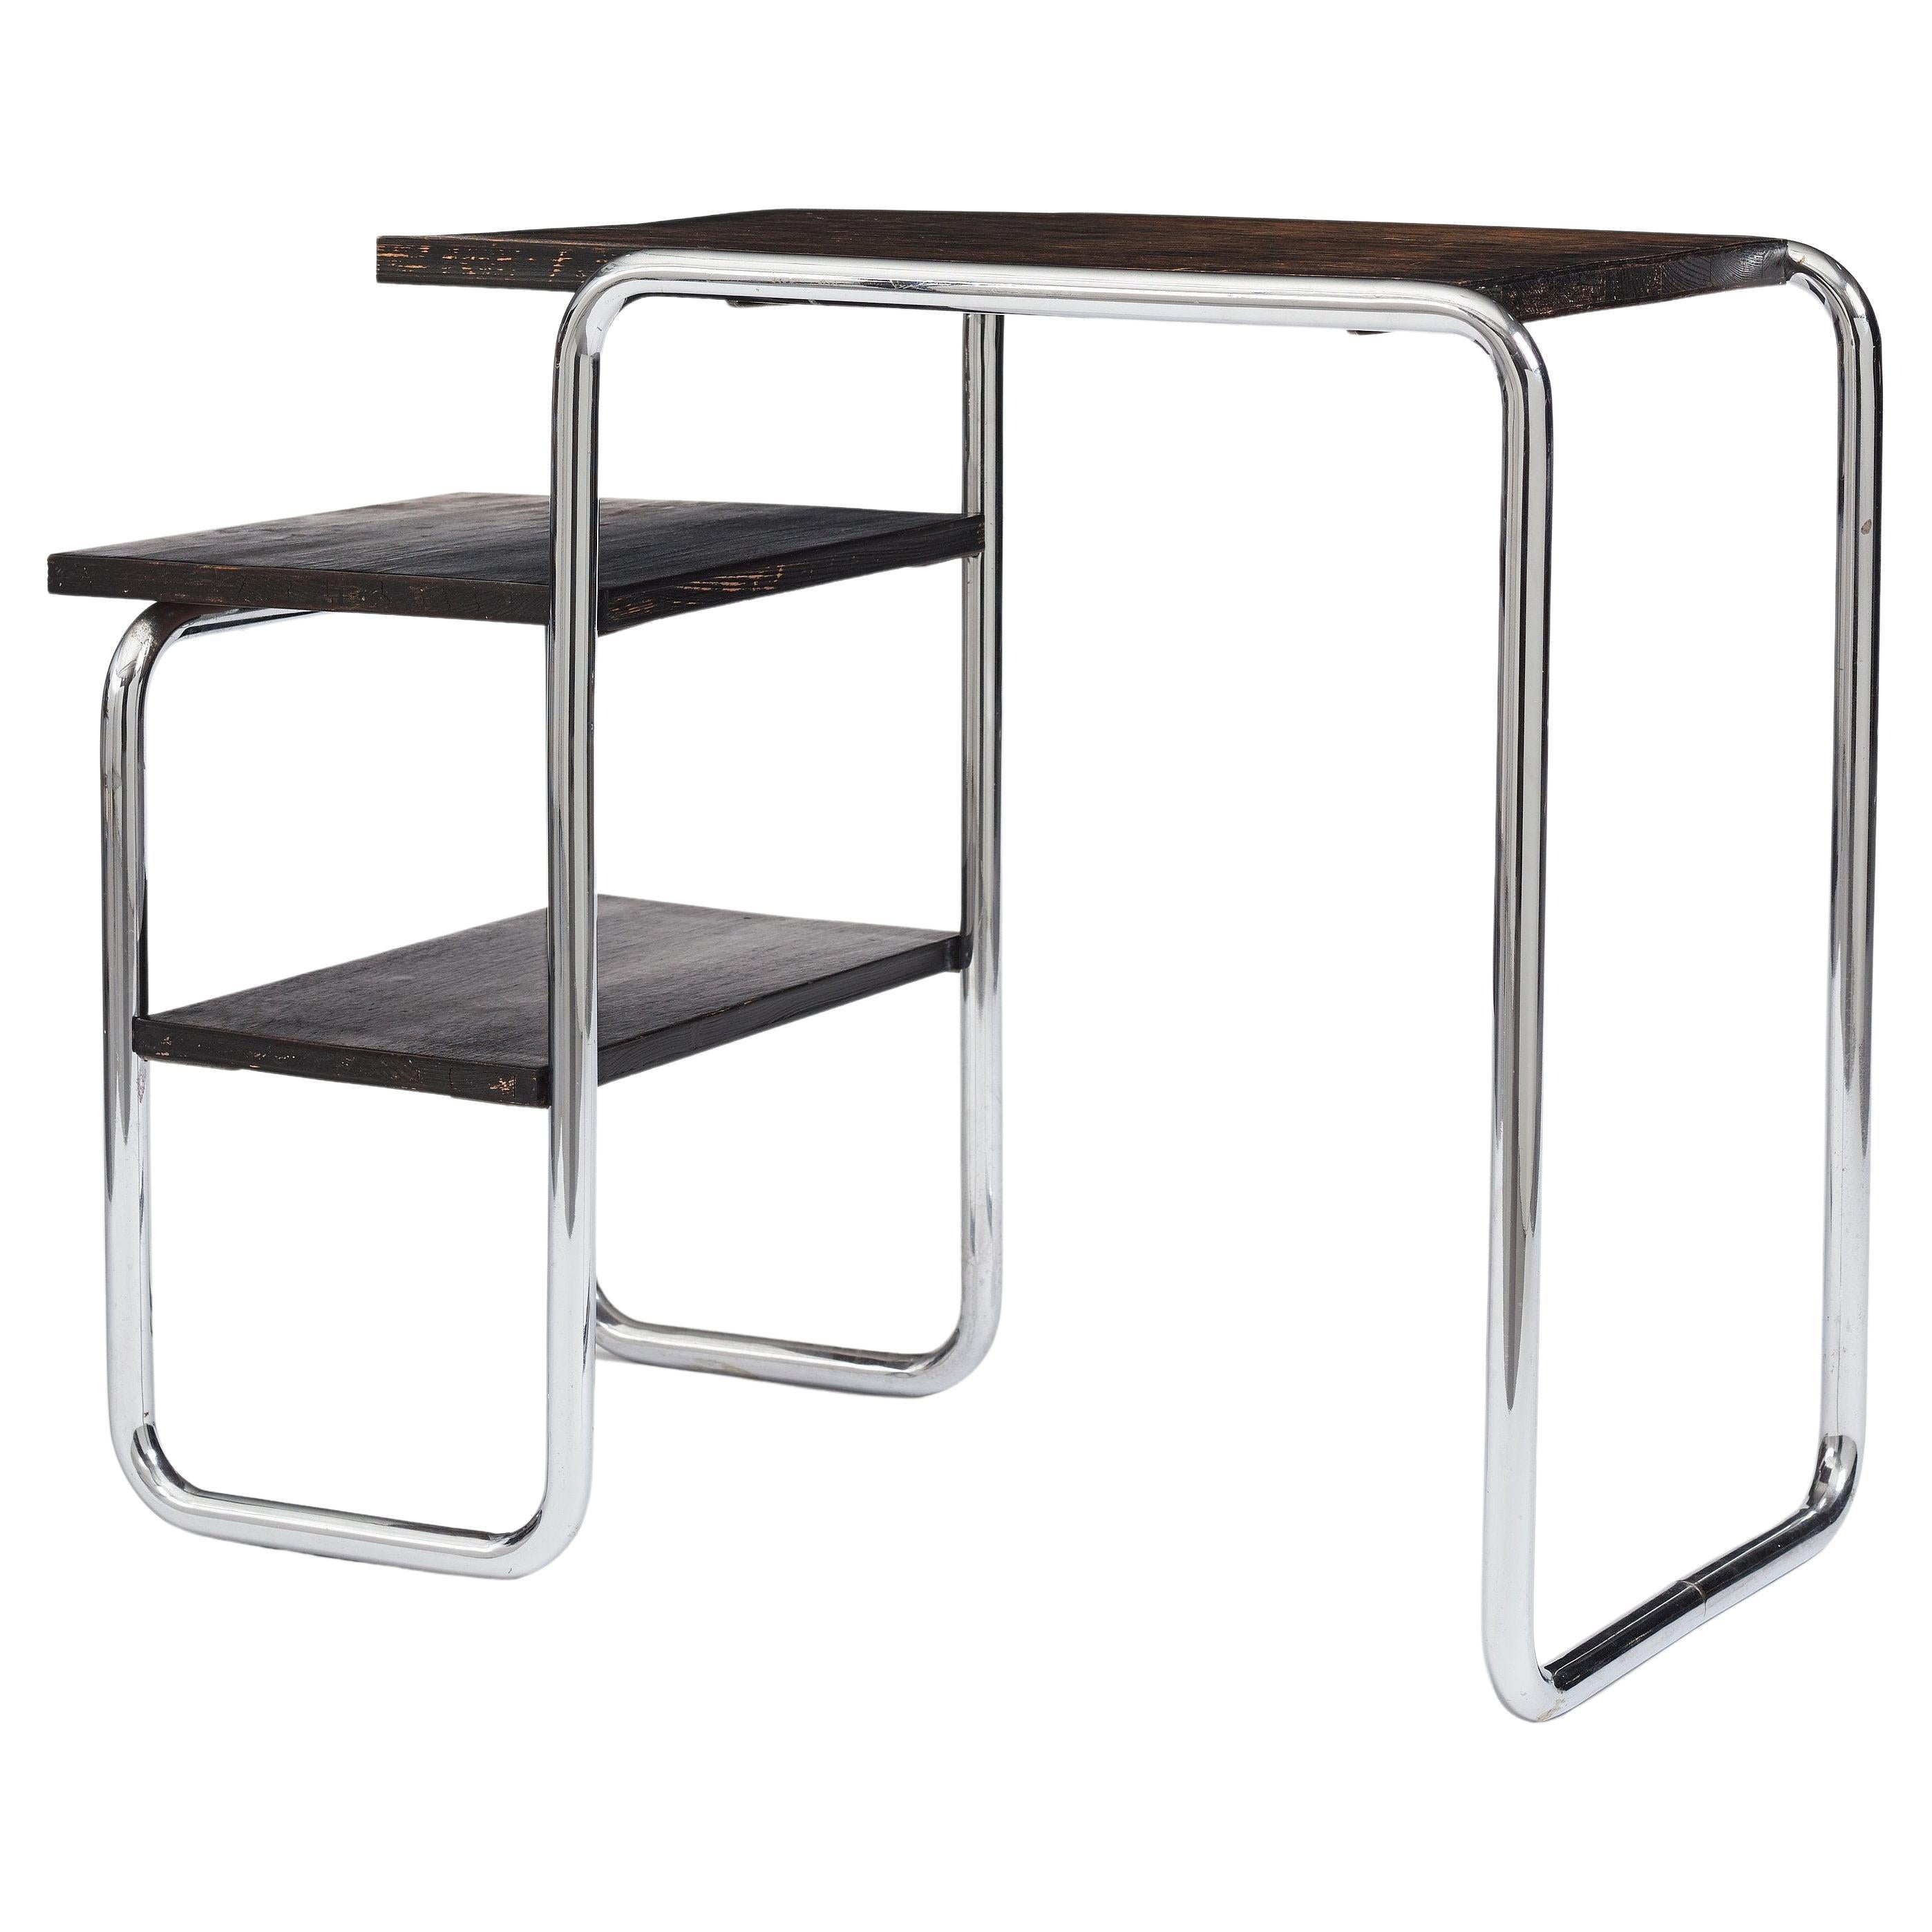 Early Bauhaus "B21" Side Table Desk by Marcel Breuer Produced by Thonet, 1930s For Sale